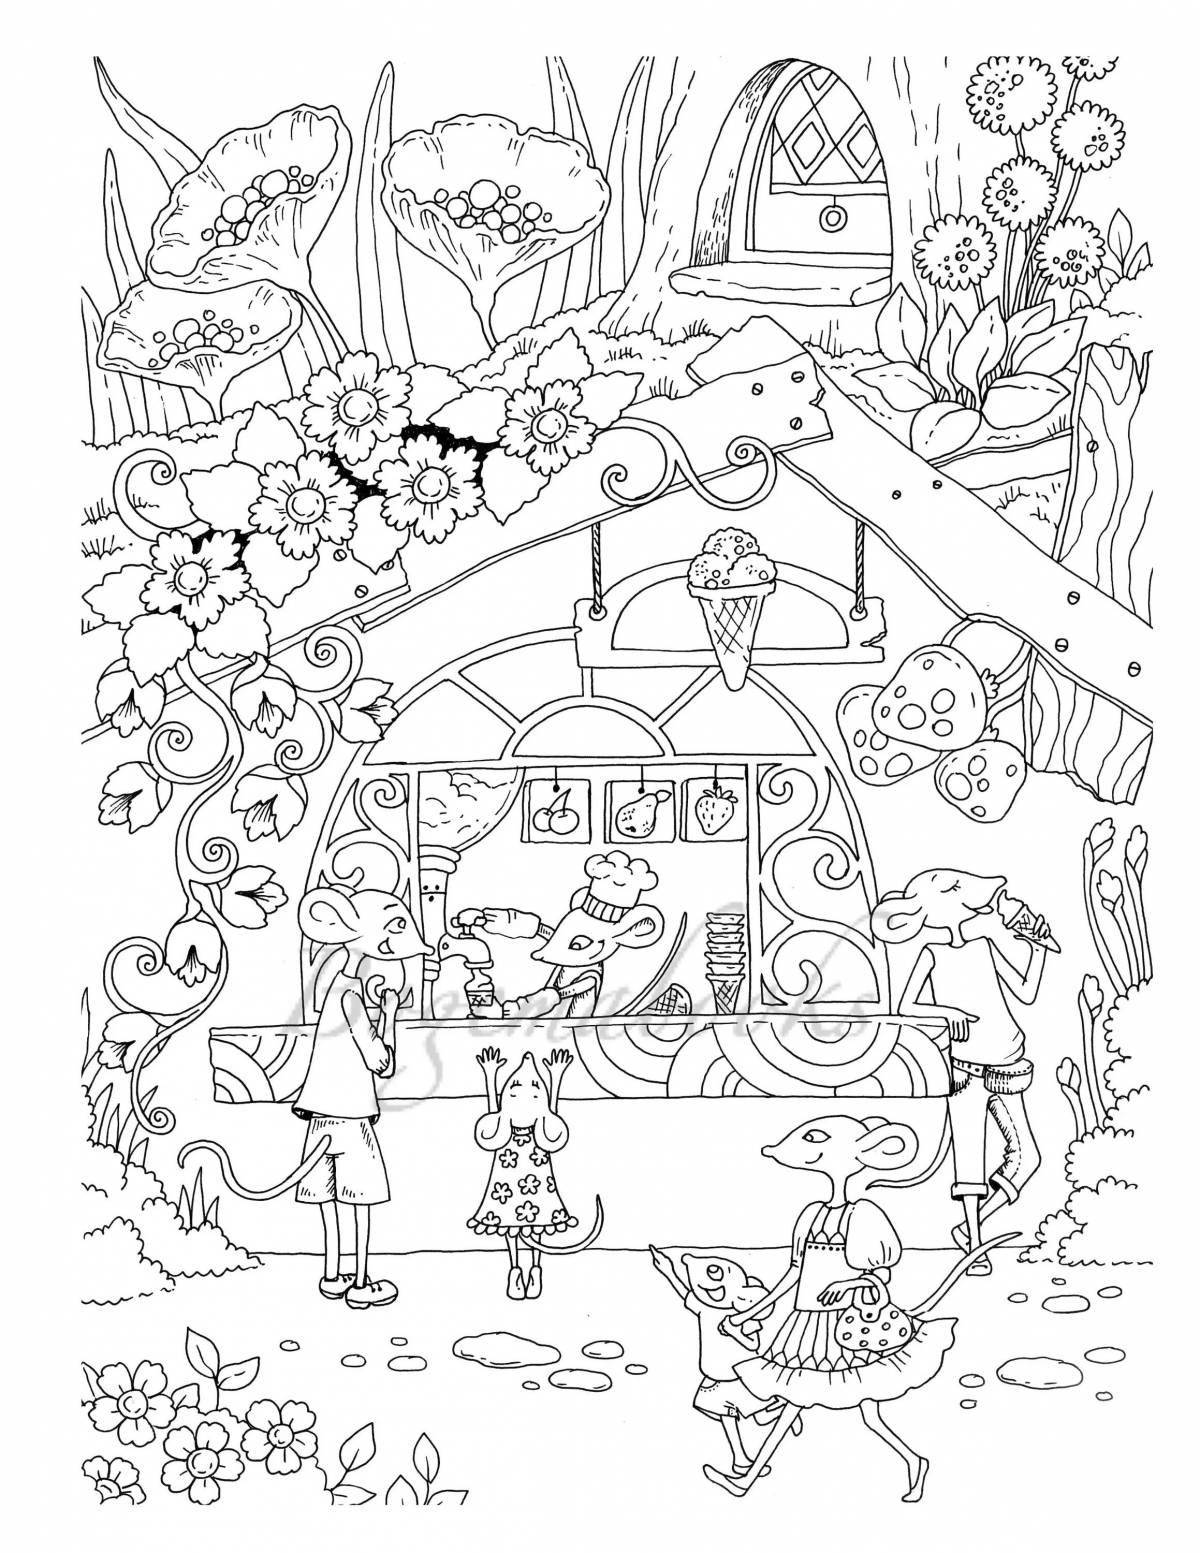 Coloring page majestic little town